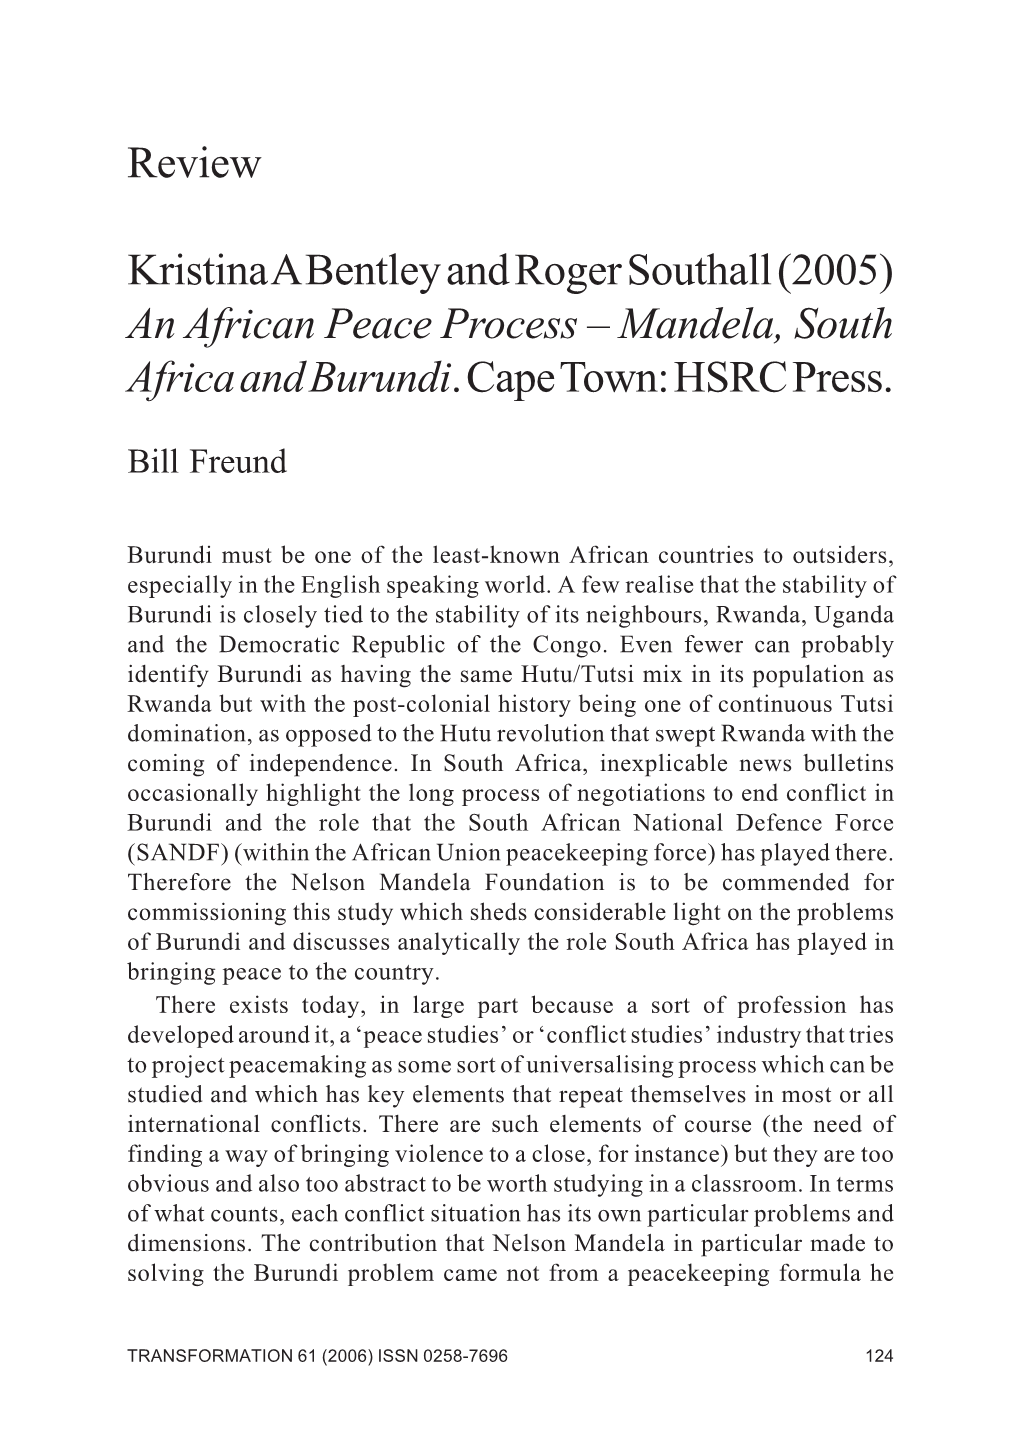 Review Kristina a Bentley and Roger Southall